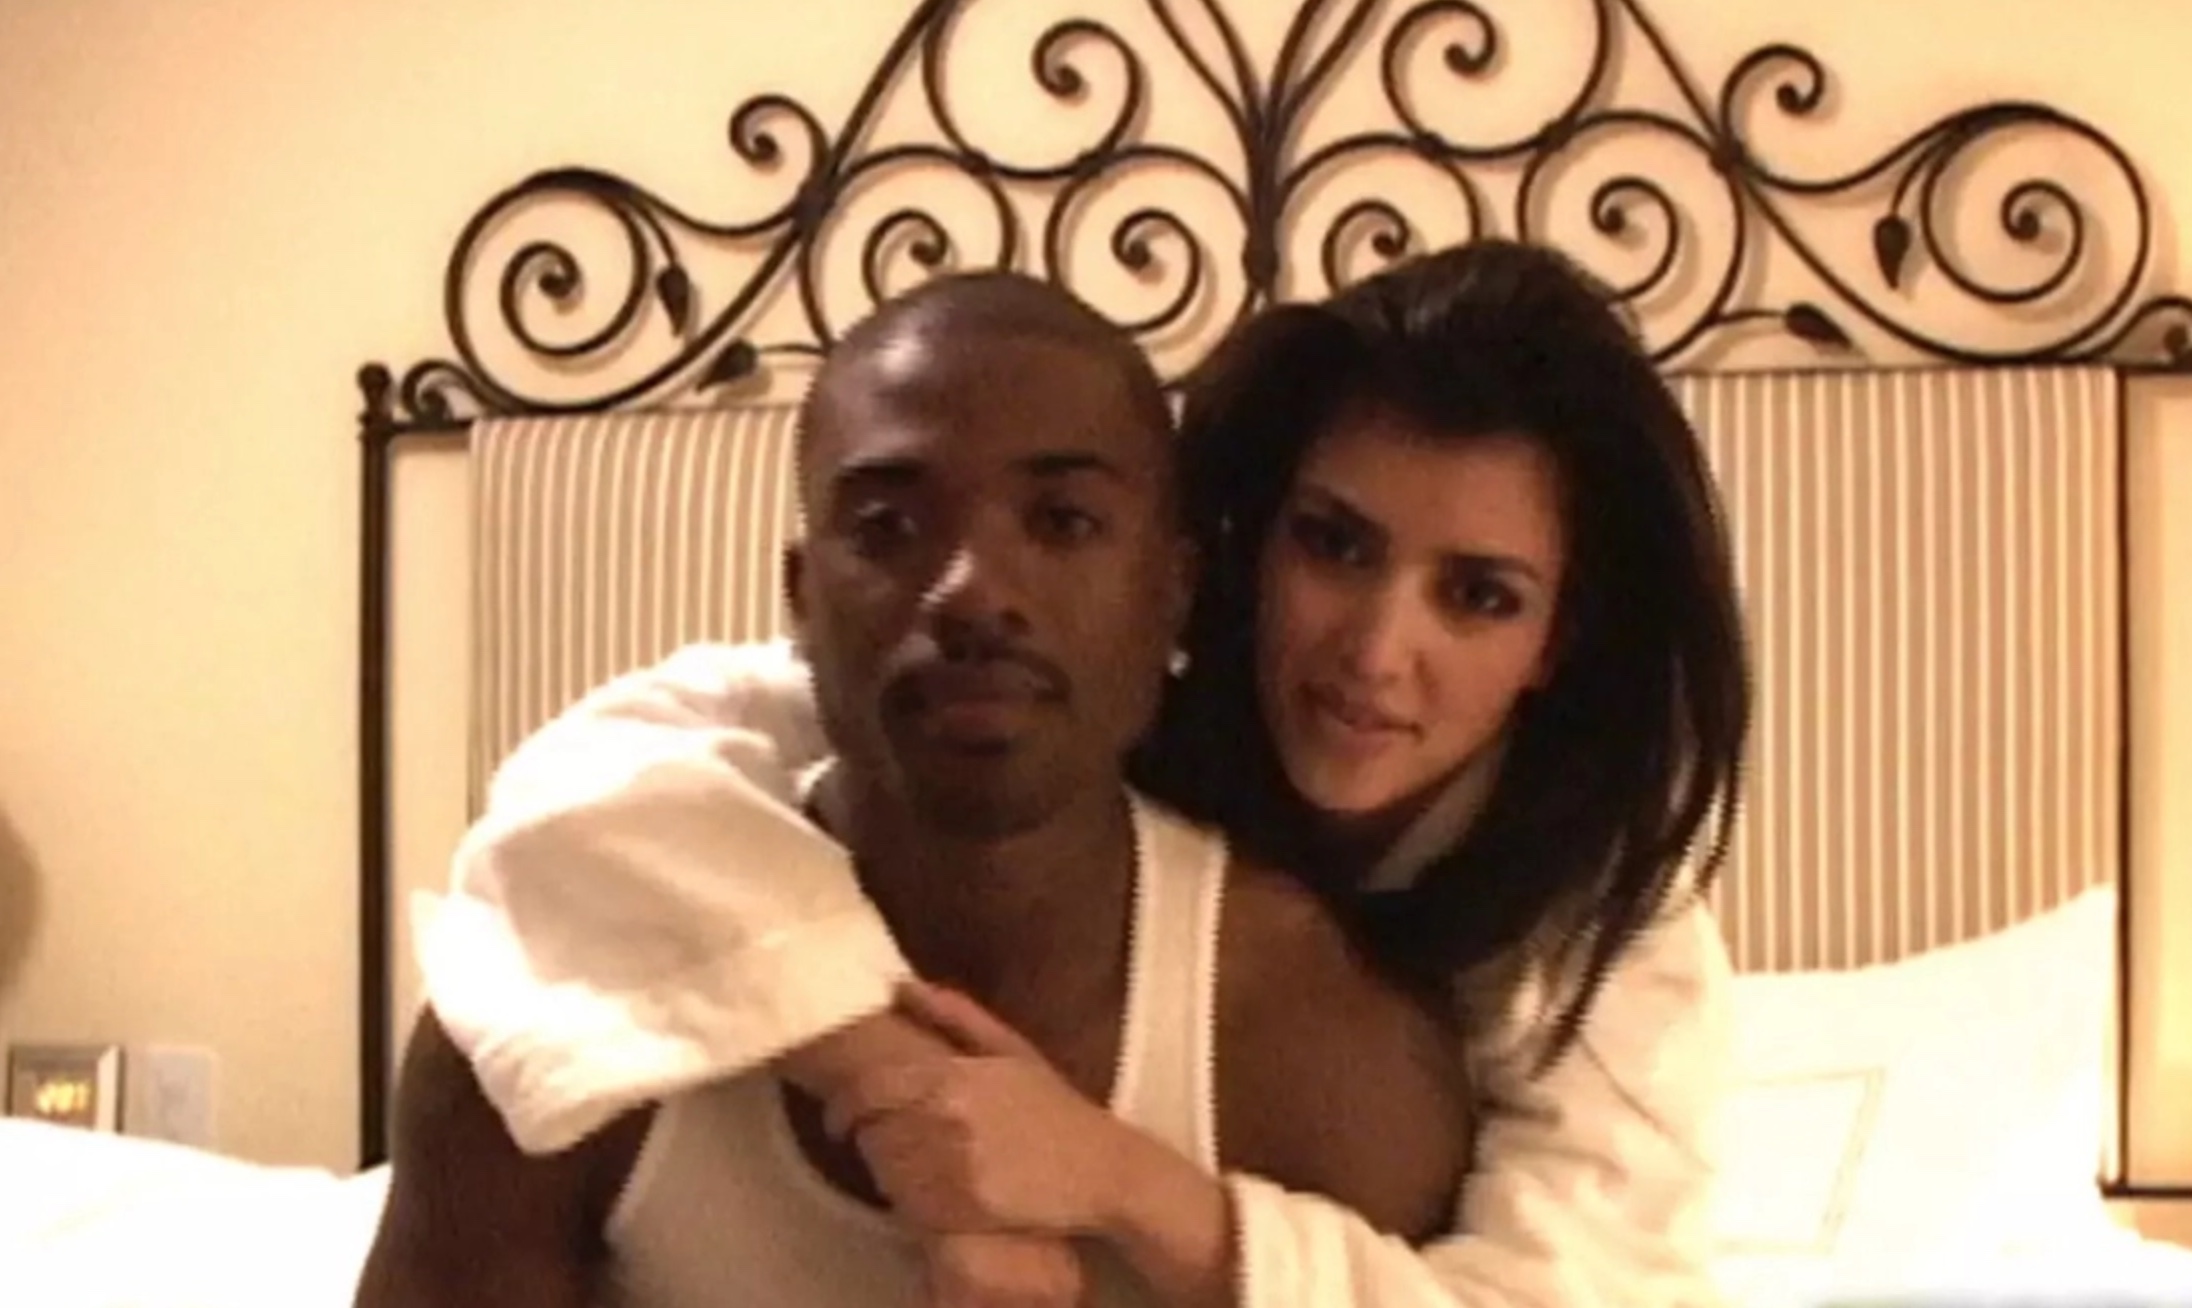 Kim And Ray J Tape